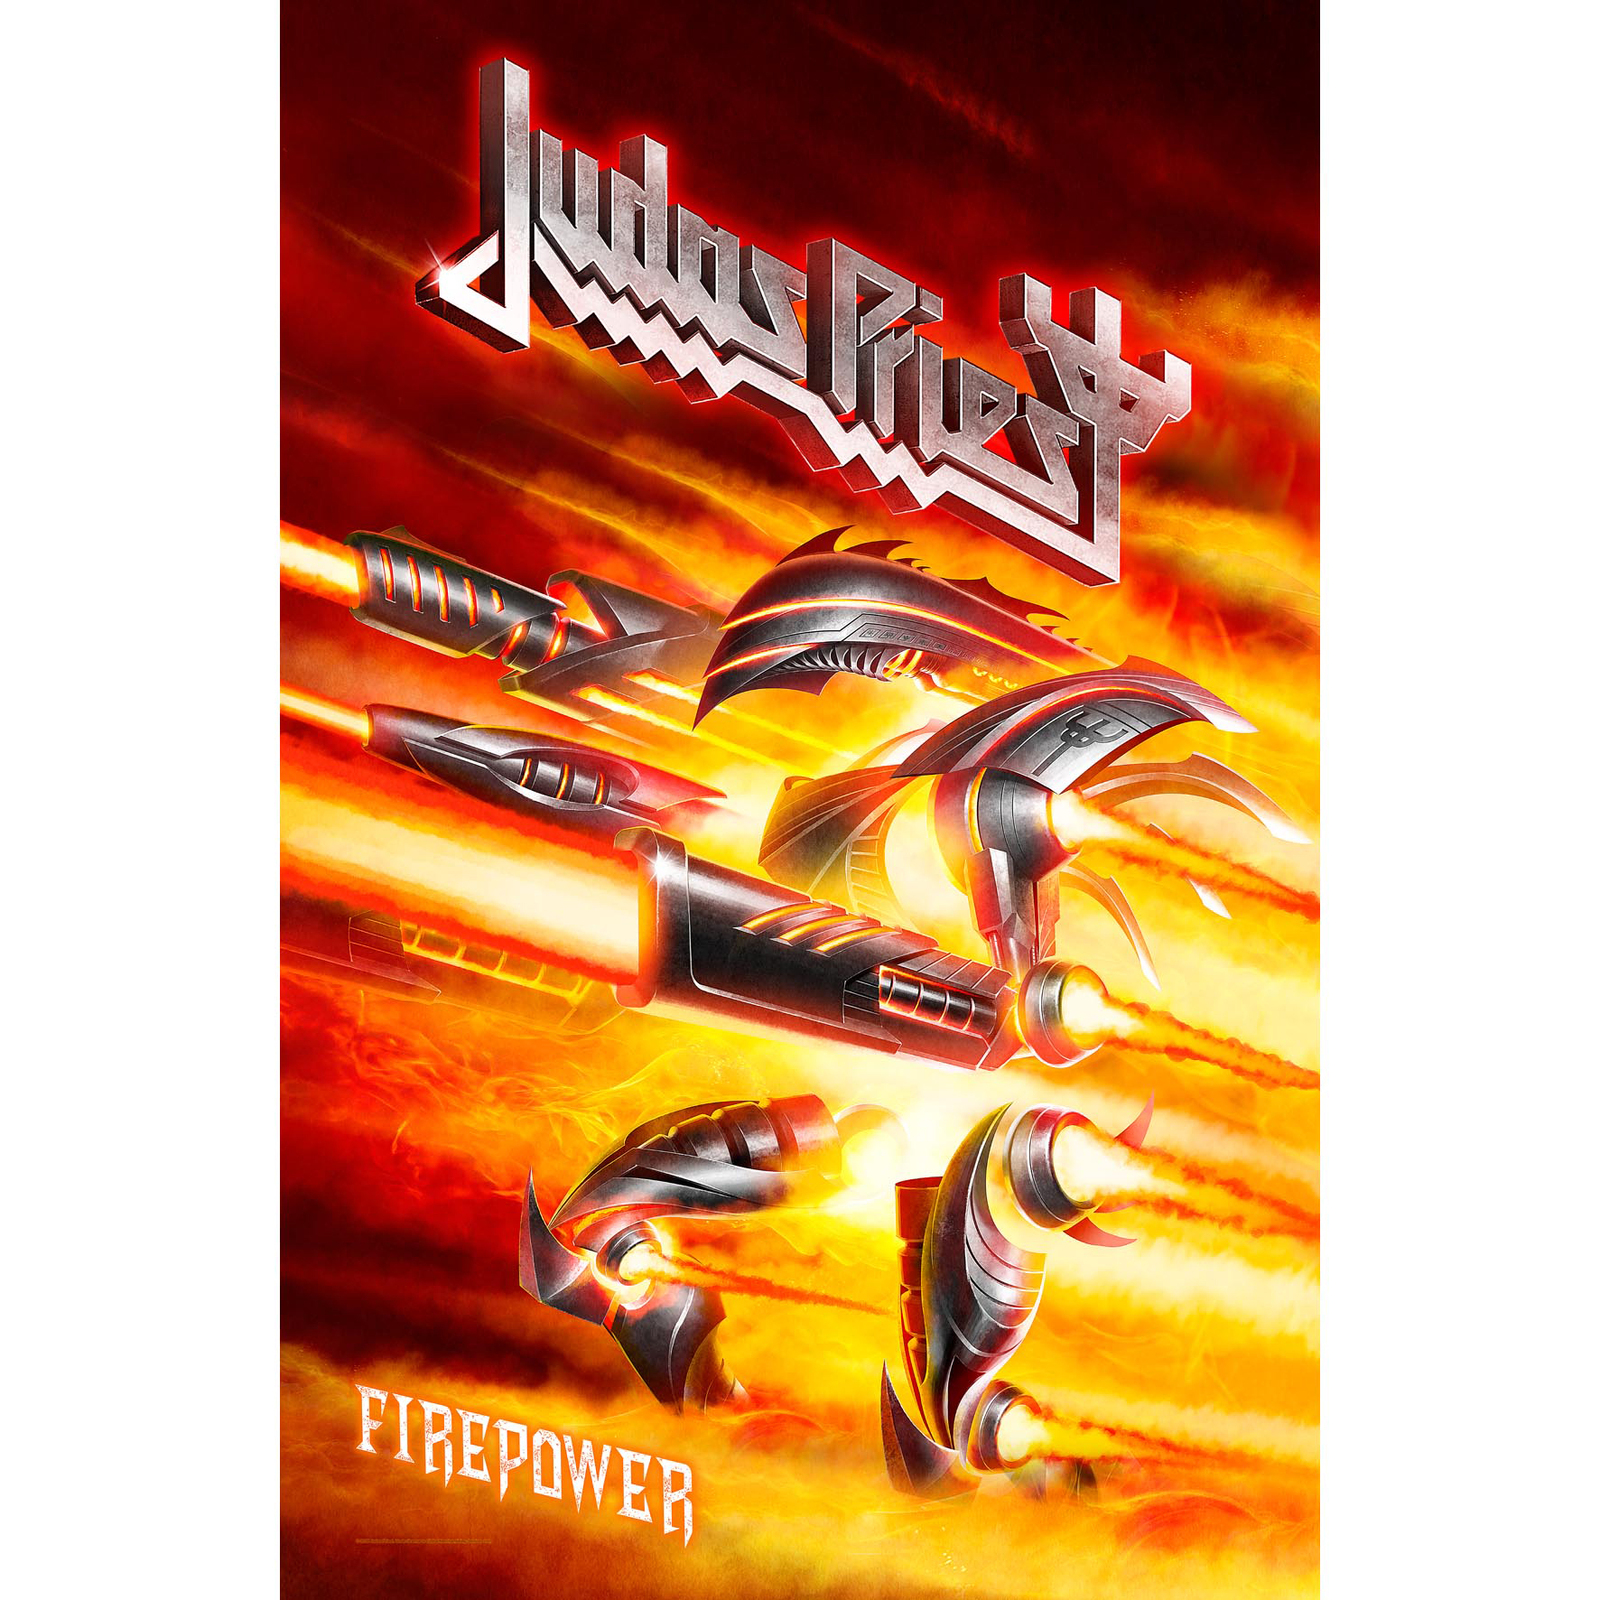 NEW 2 X 5 INCH RED JUDAS PRIEST IRON ON PATCH FREE SHIPPING